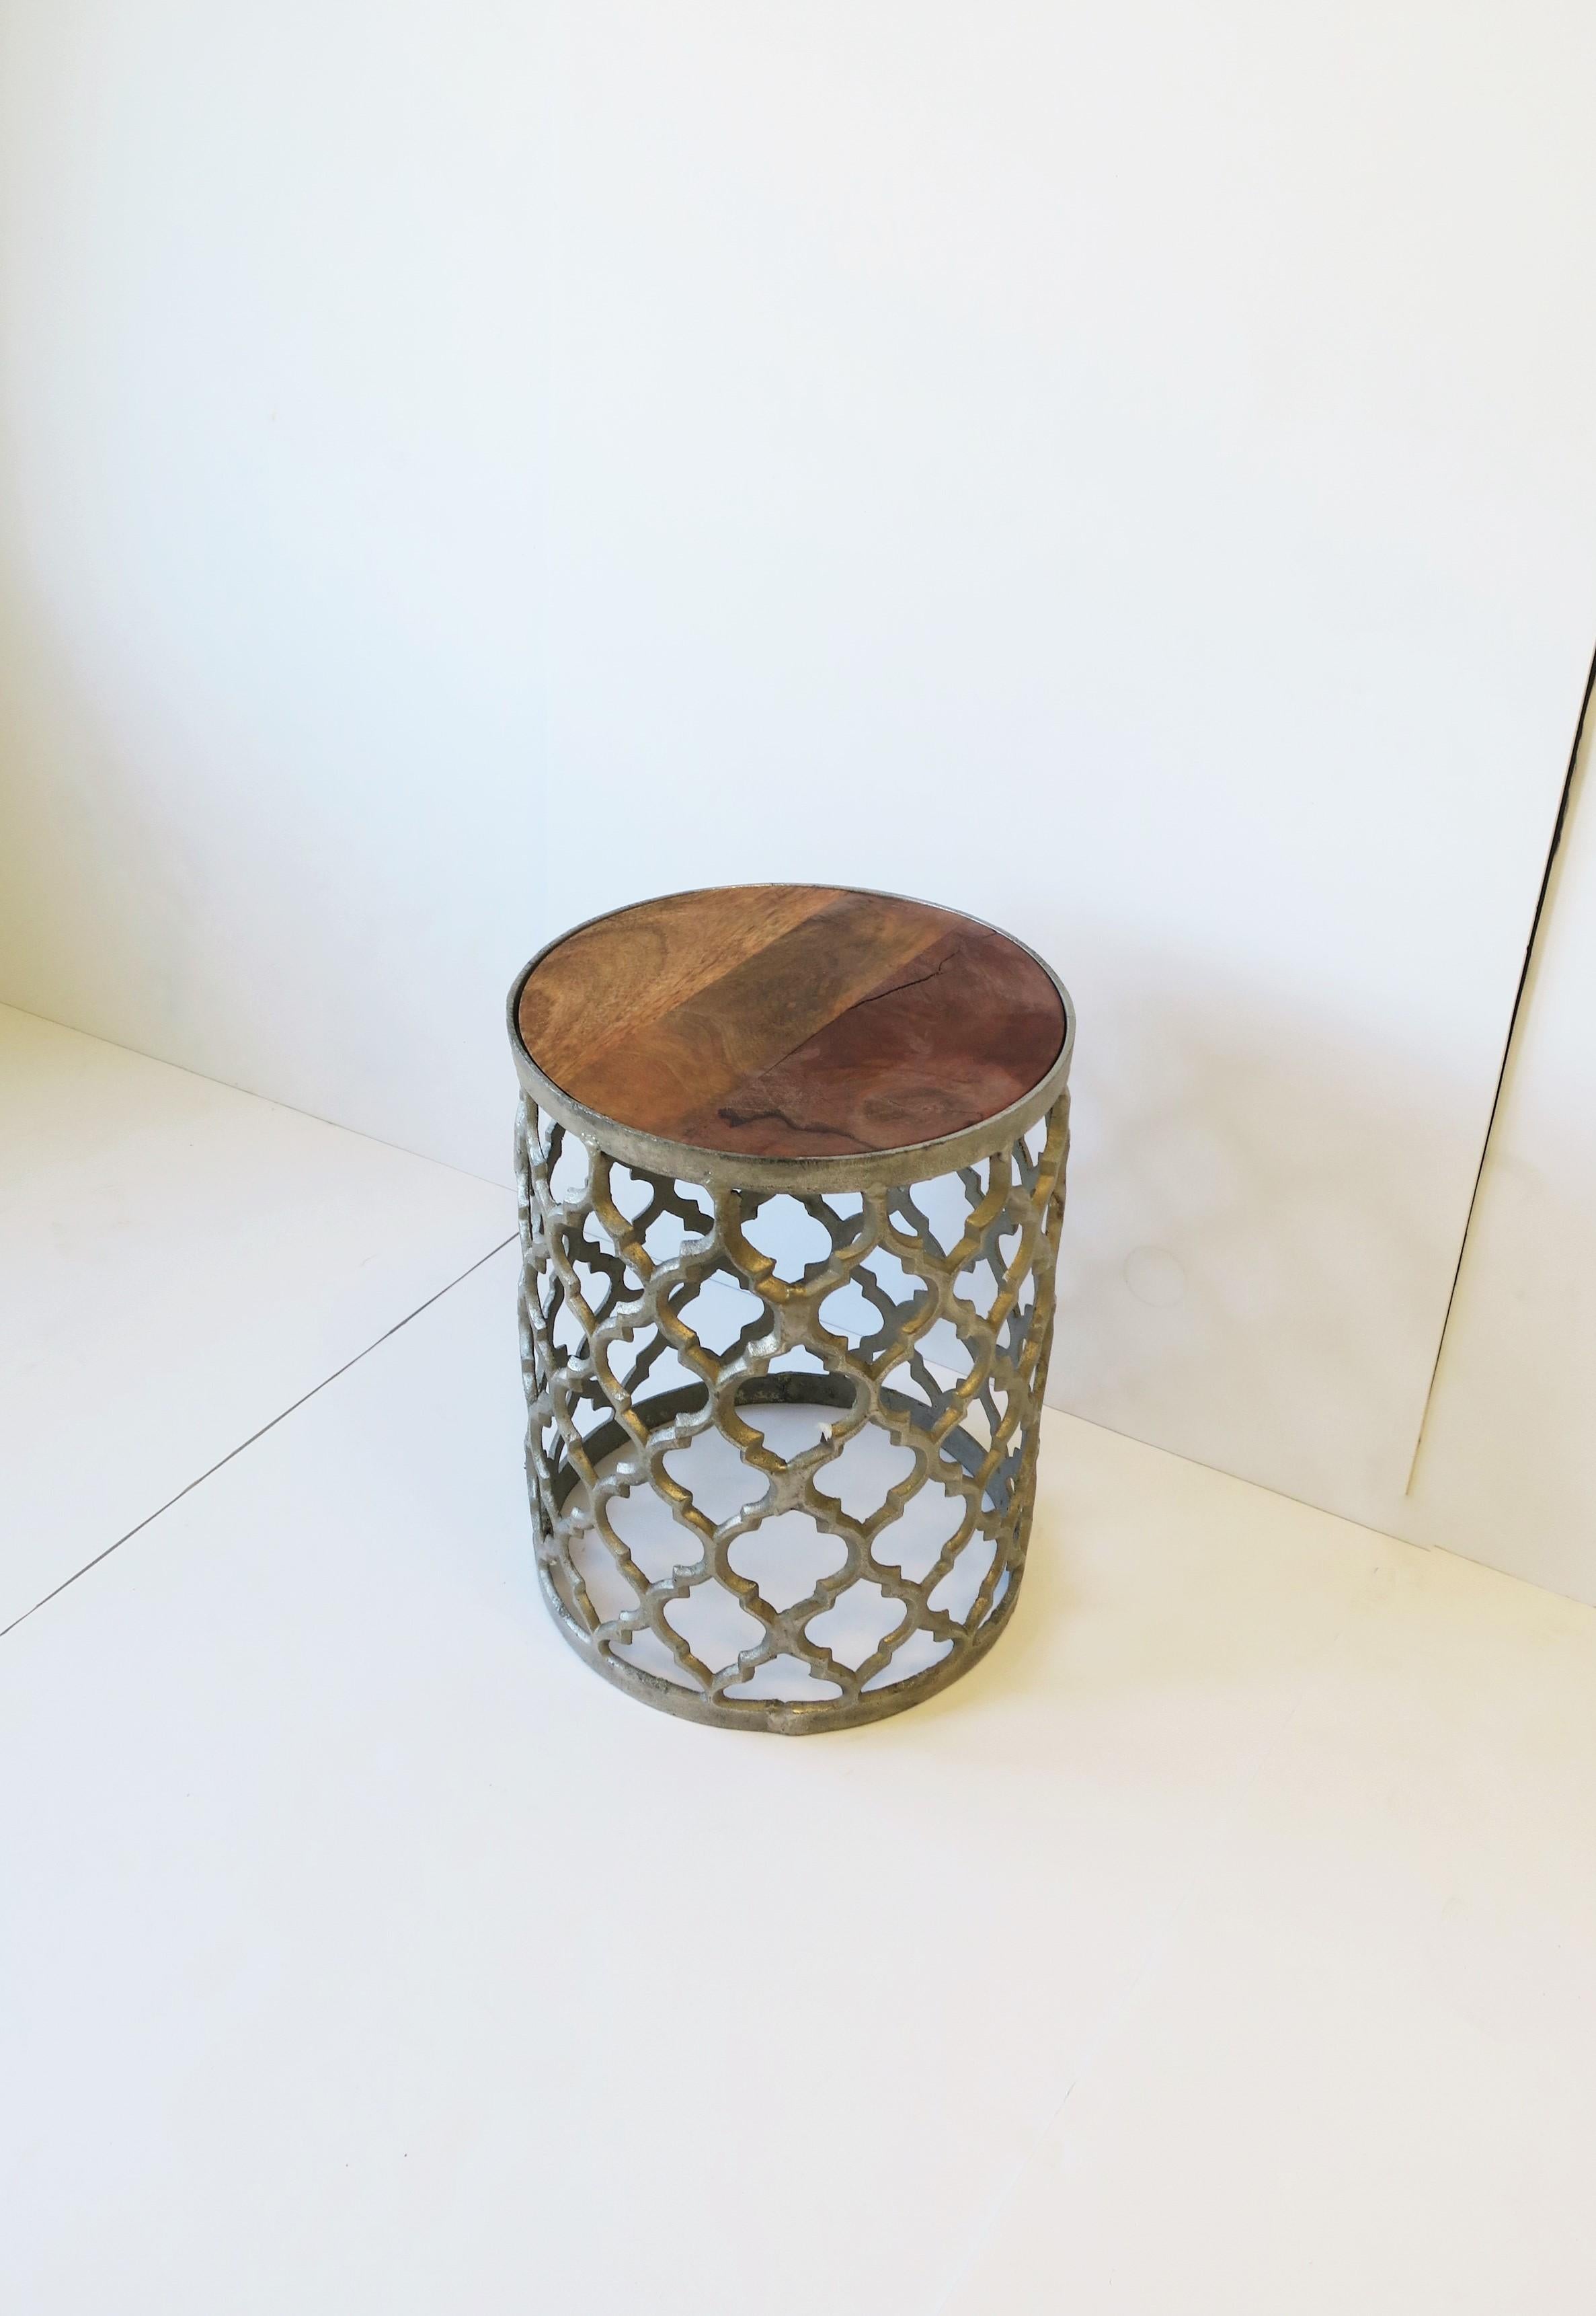 A silvered metal round drinks or side table with a Moorish design style, circa early 21st century. A silver-tone metal drinks, side, or end table with a Moroccan/Moorish designed base frame and tri-tone wood top. A convenient table that easy to move